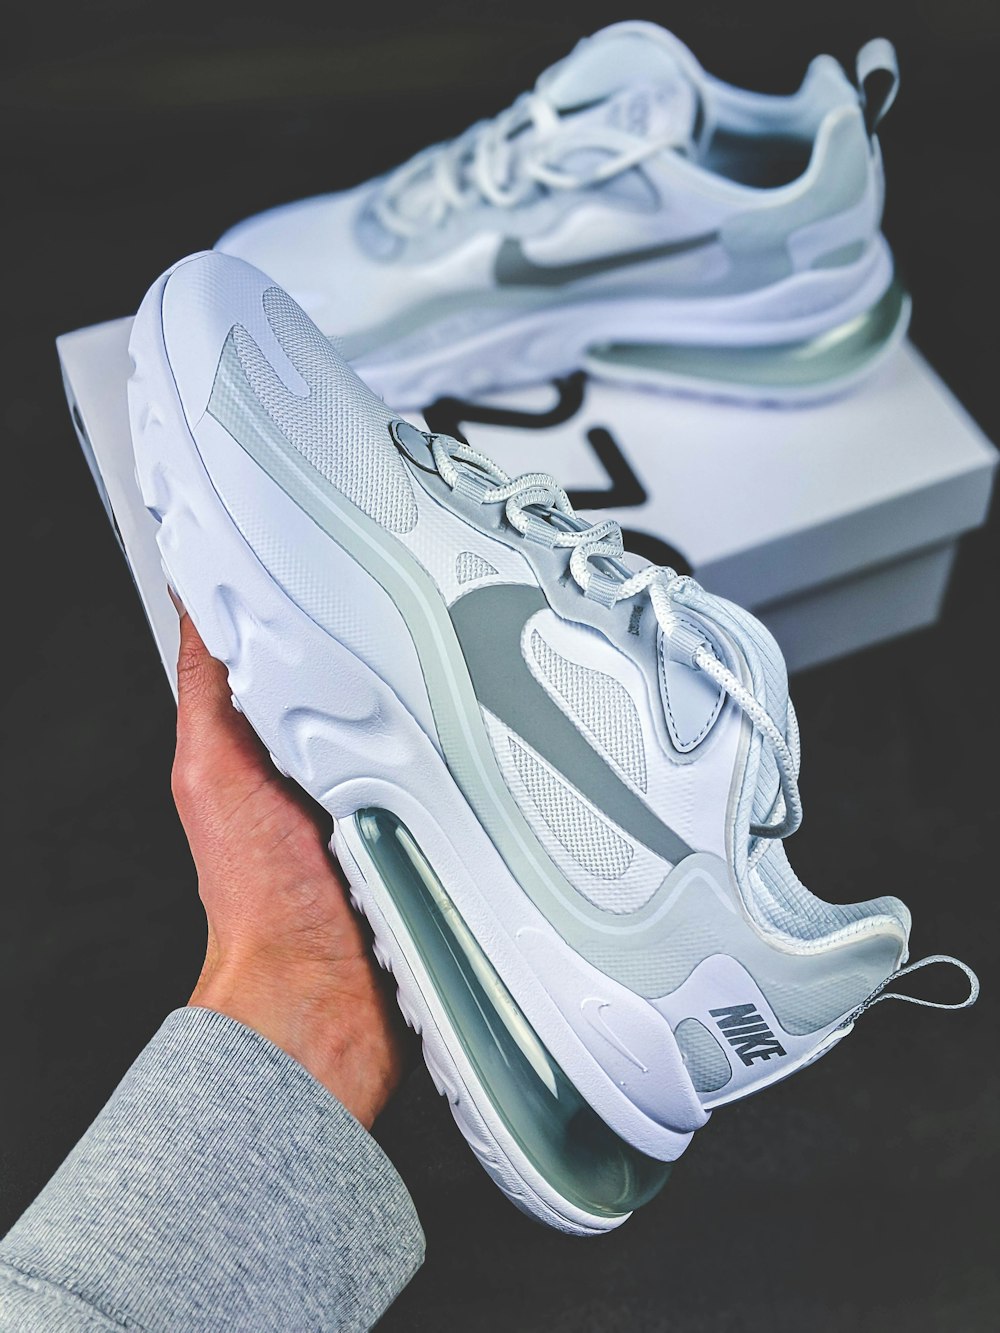 person holding gray and white nike air max